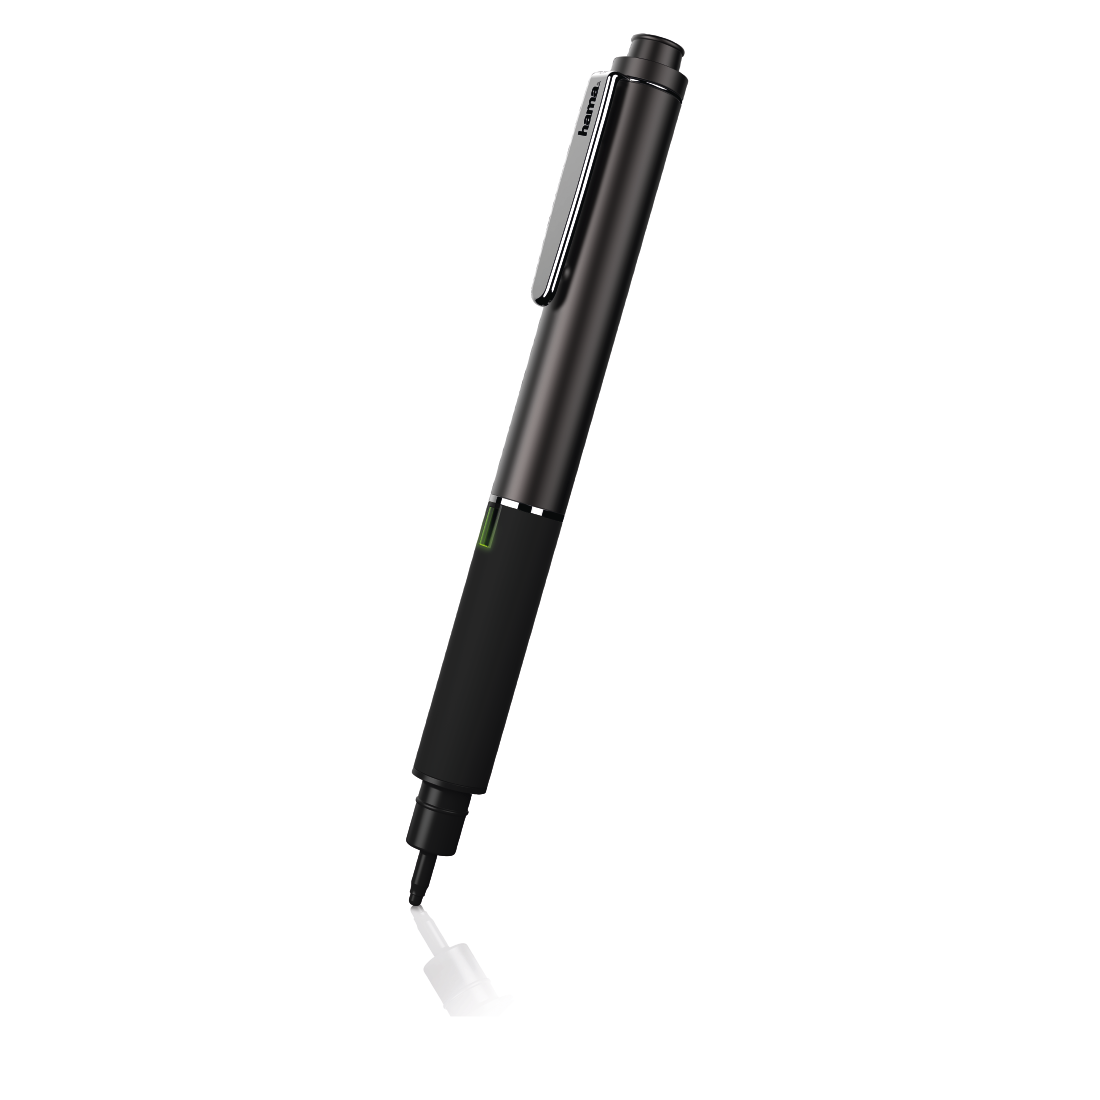 00107830 Hama "Active" Stylus with Thin 2 mm Tip for Tablet PCs ...